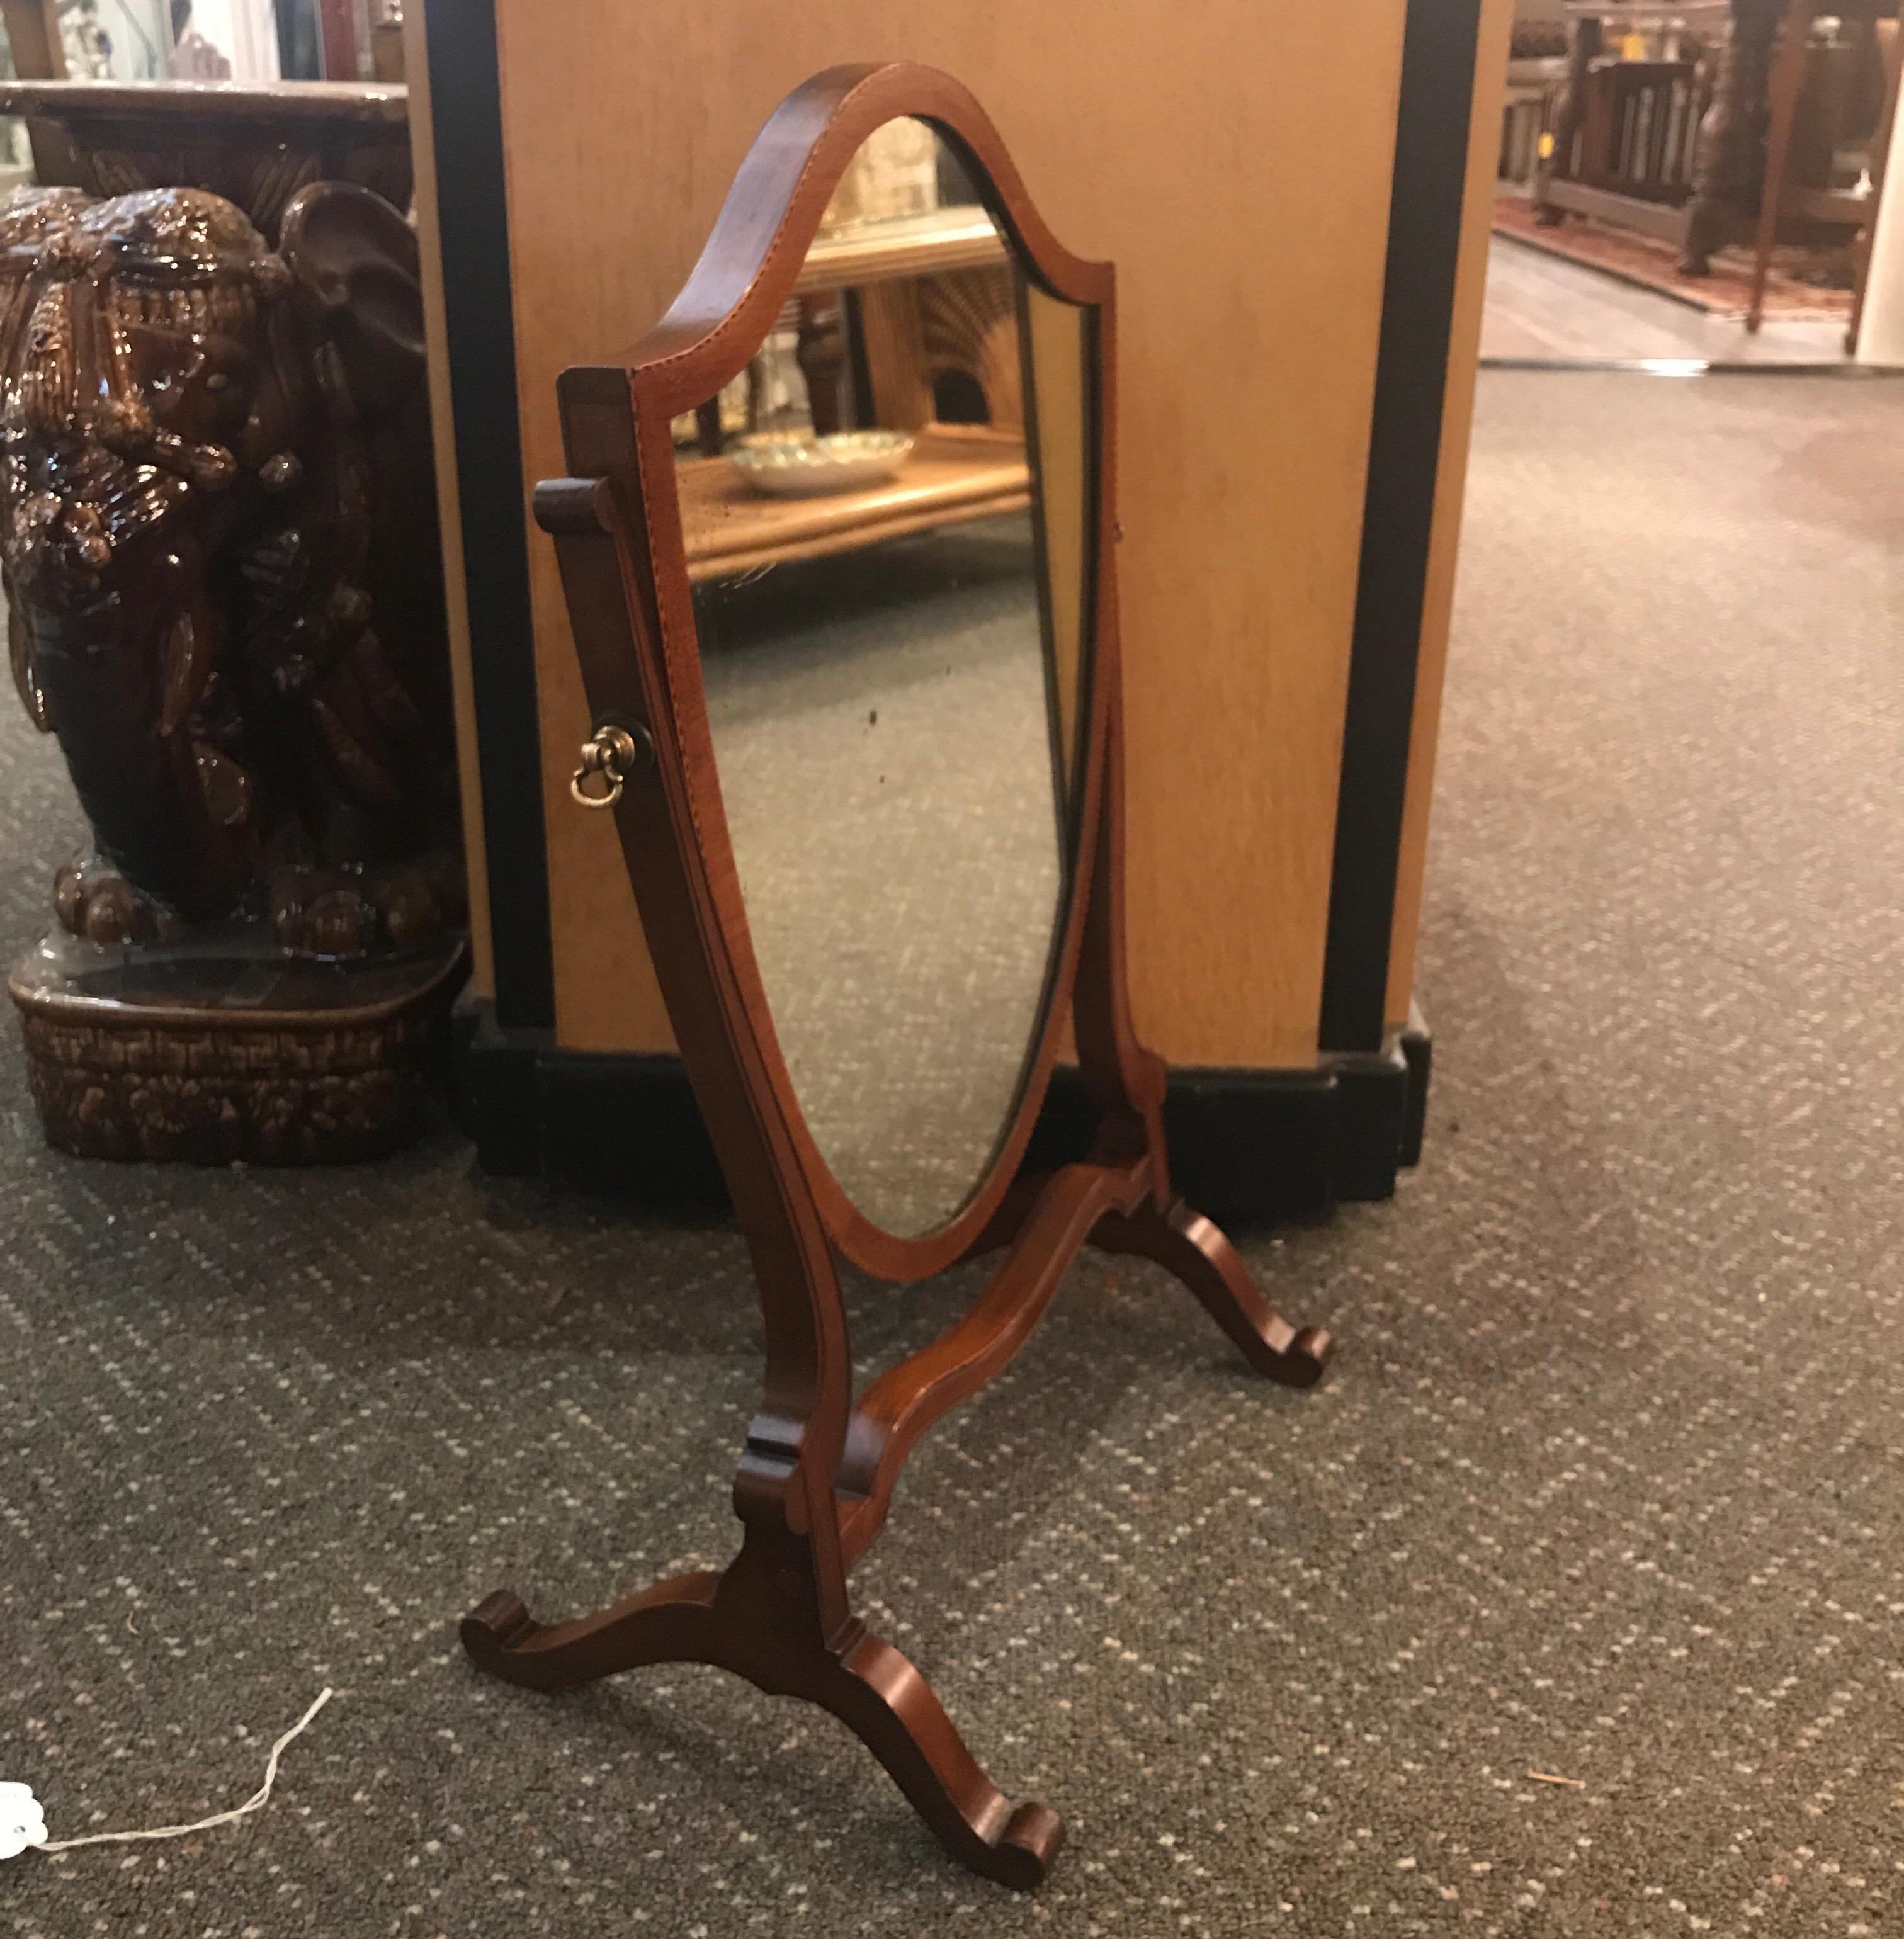 Graceful Hepplewhite shield dressing mirror on Stand. The mahogany mirror with satinwood and ebony inlaid edge. Late 19th century with original mirror showing some silver fade and small spots.  Ask for a shipping quote using Fedex or UPS, the